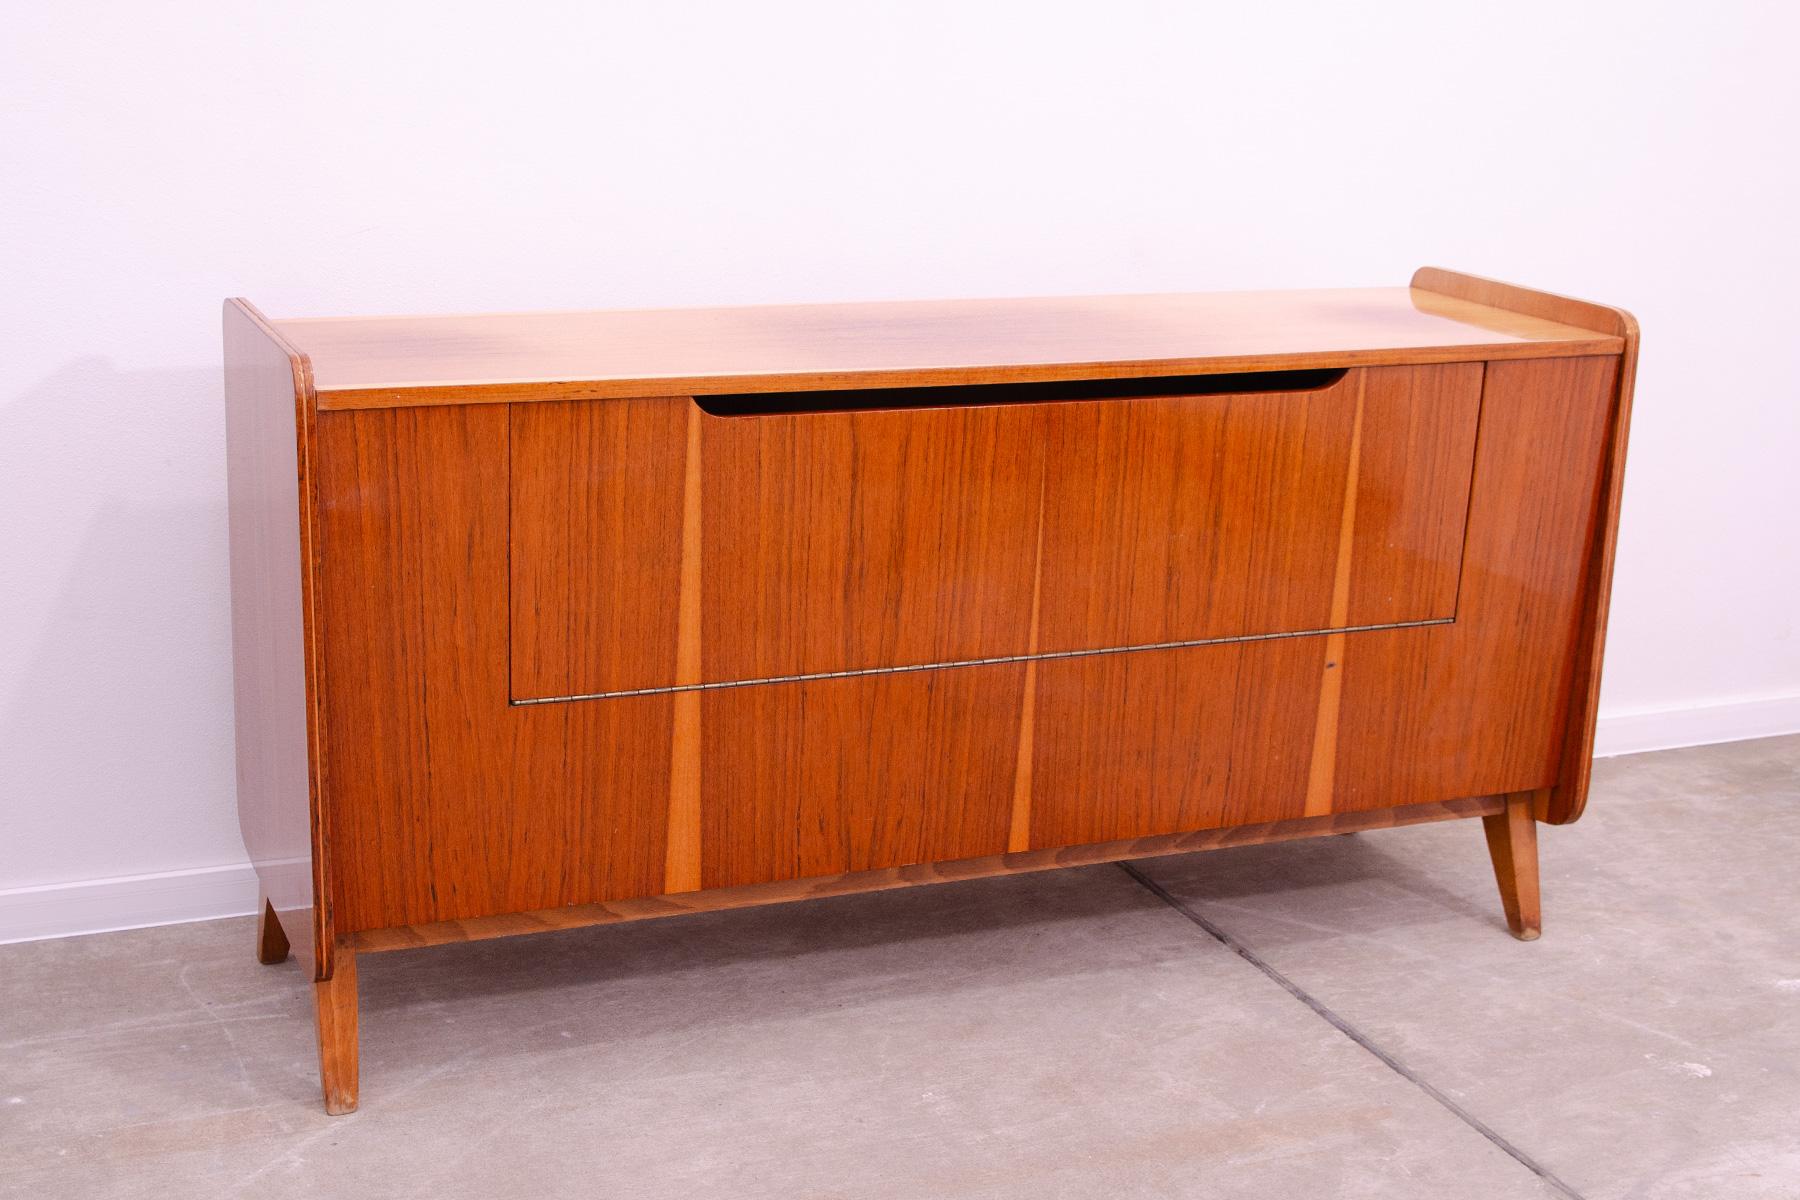 Mid century modern walnut dresser by Frantisek Jirak for Tatra nabytok. Made in the former Czechoslovakia during the 1960´s. The dresser has been part of the living set. The furniture can also be used as a TV cabinet and the like. It´s made of